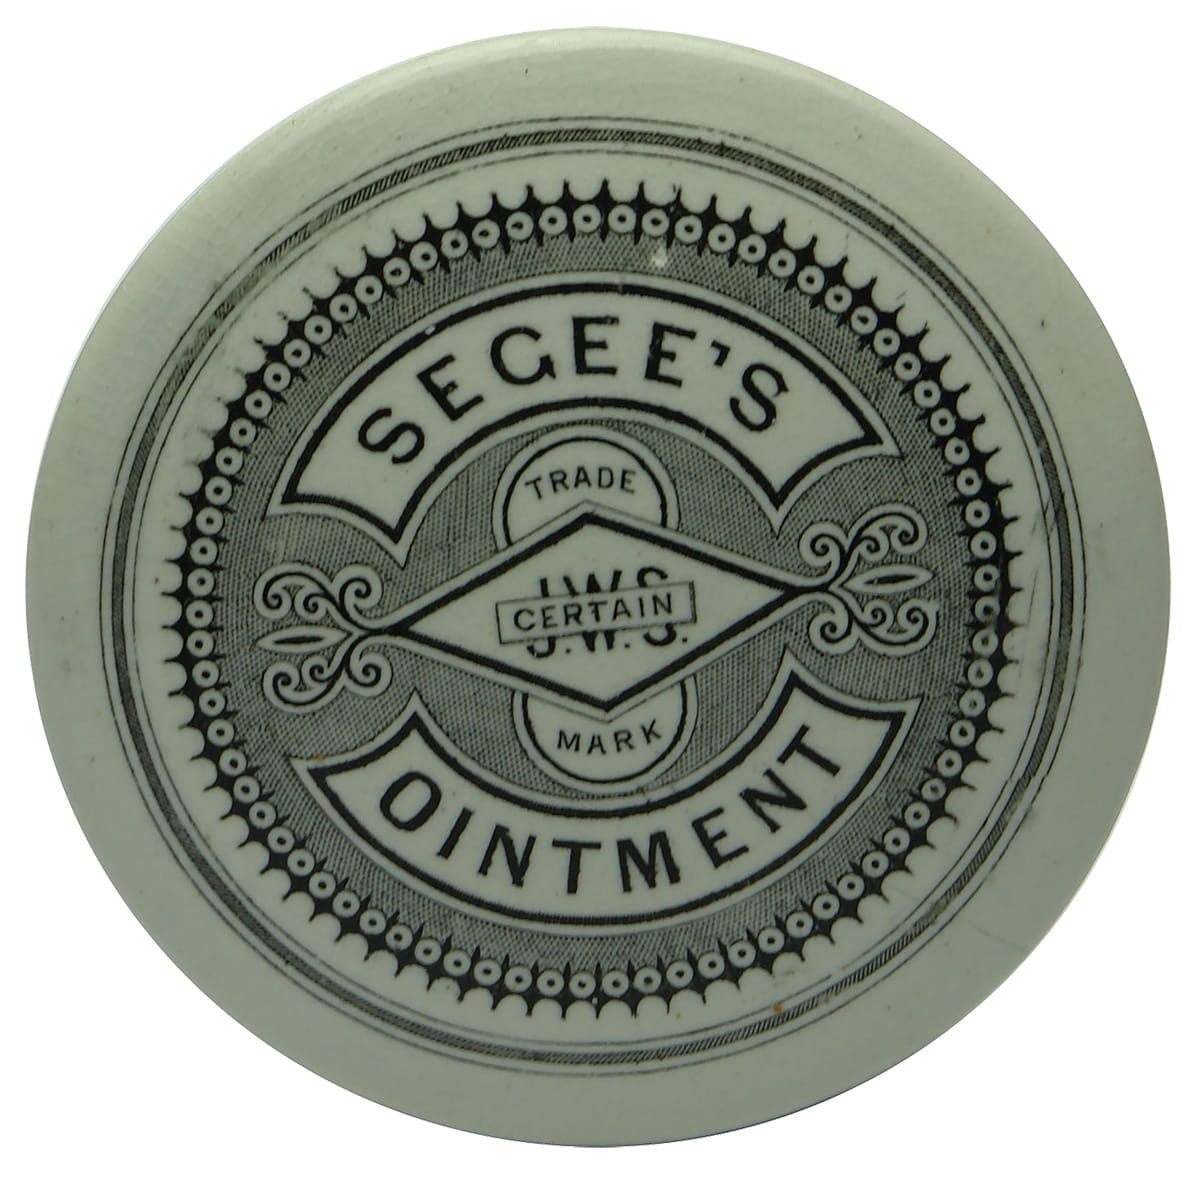 Pot Lid. Segee's Ointment. Black & White. Canadian